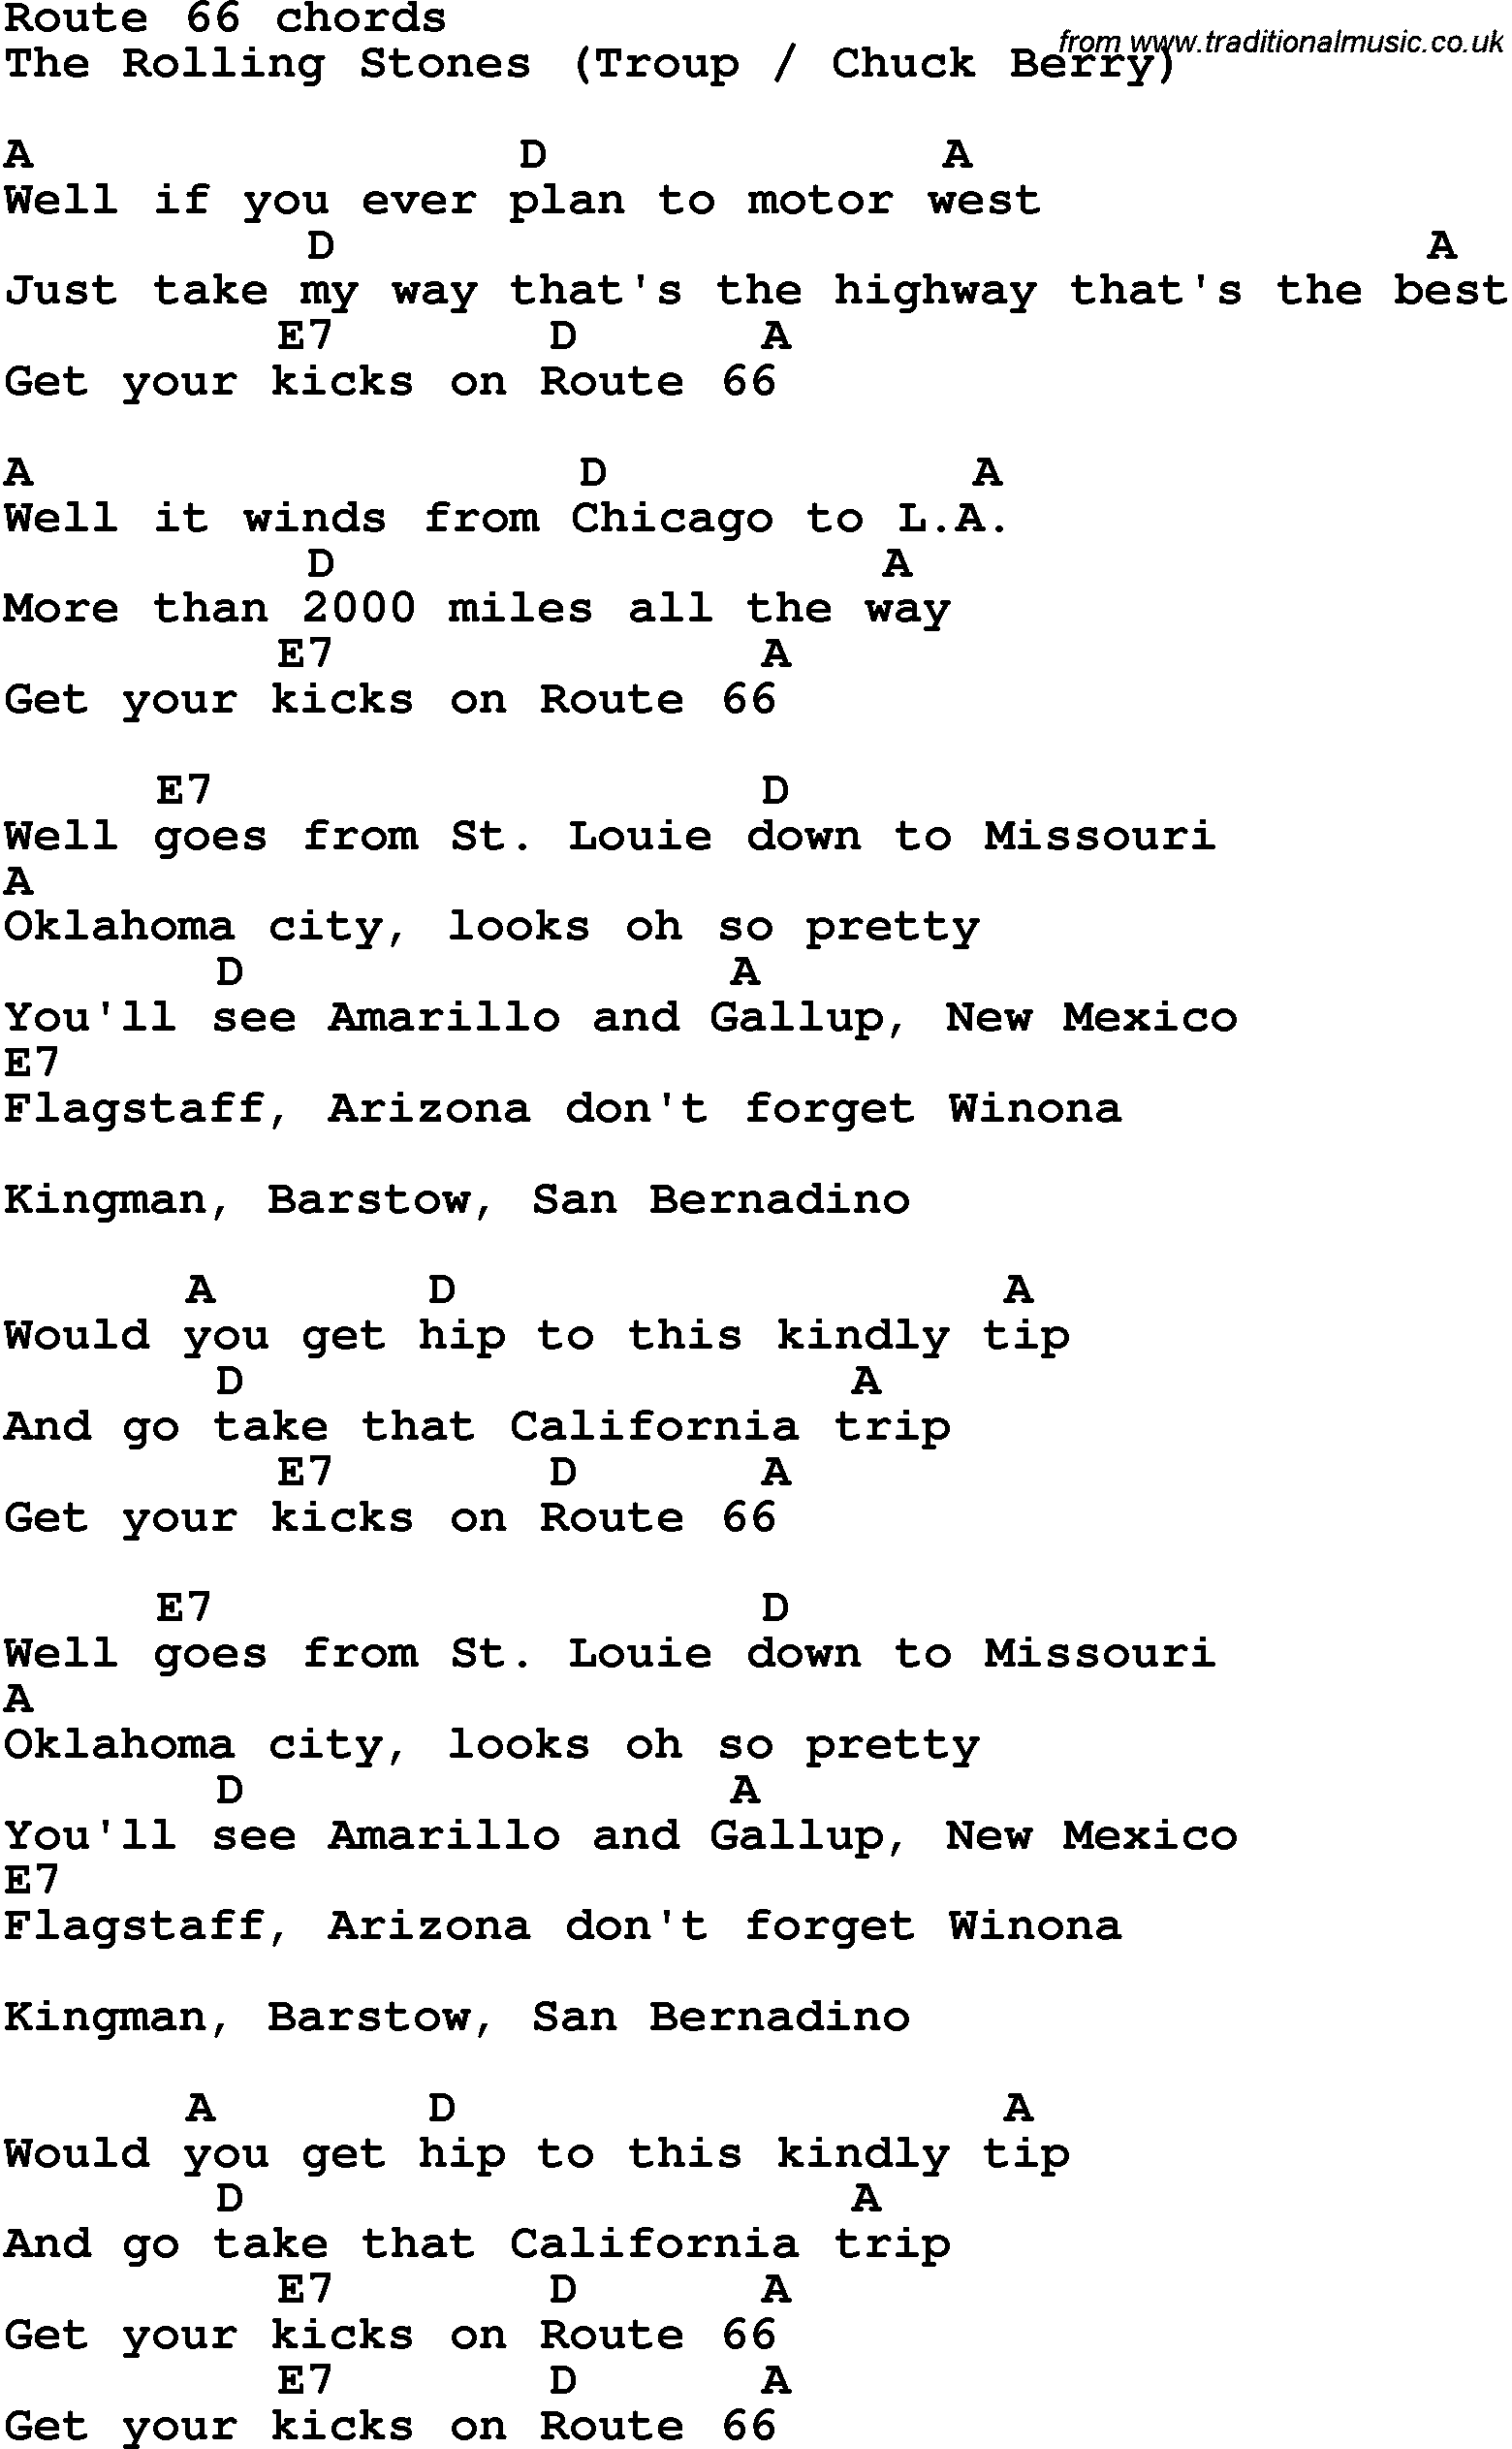 Song Lyrics with guitar chords for Route